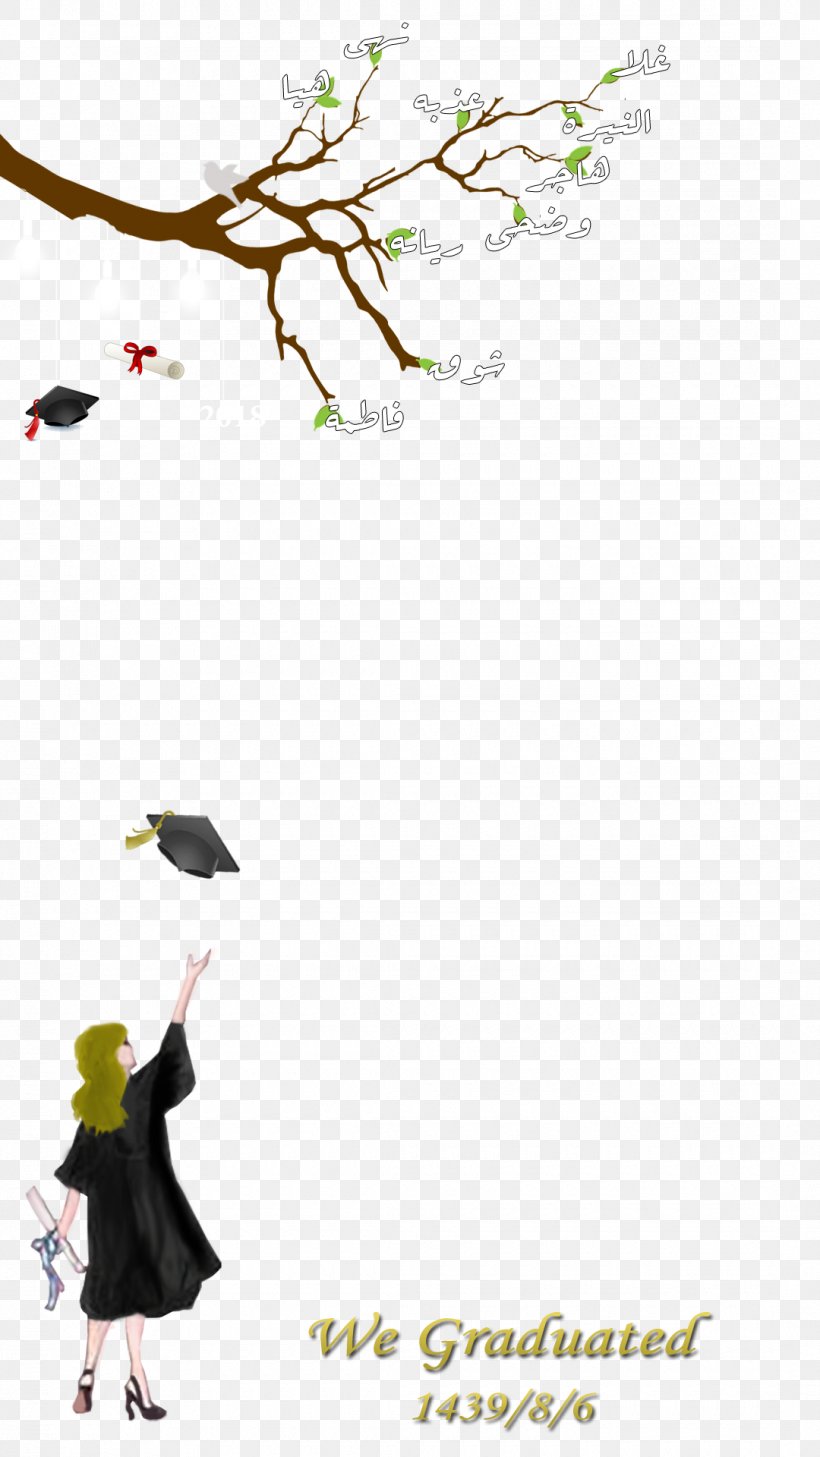 Graduation Wallpaper Vector Art Icons and Graphics for Free Download